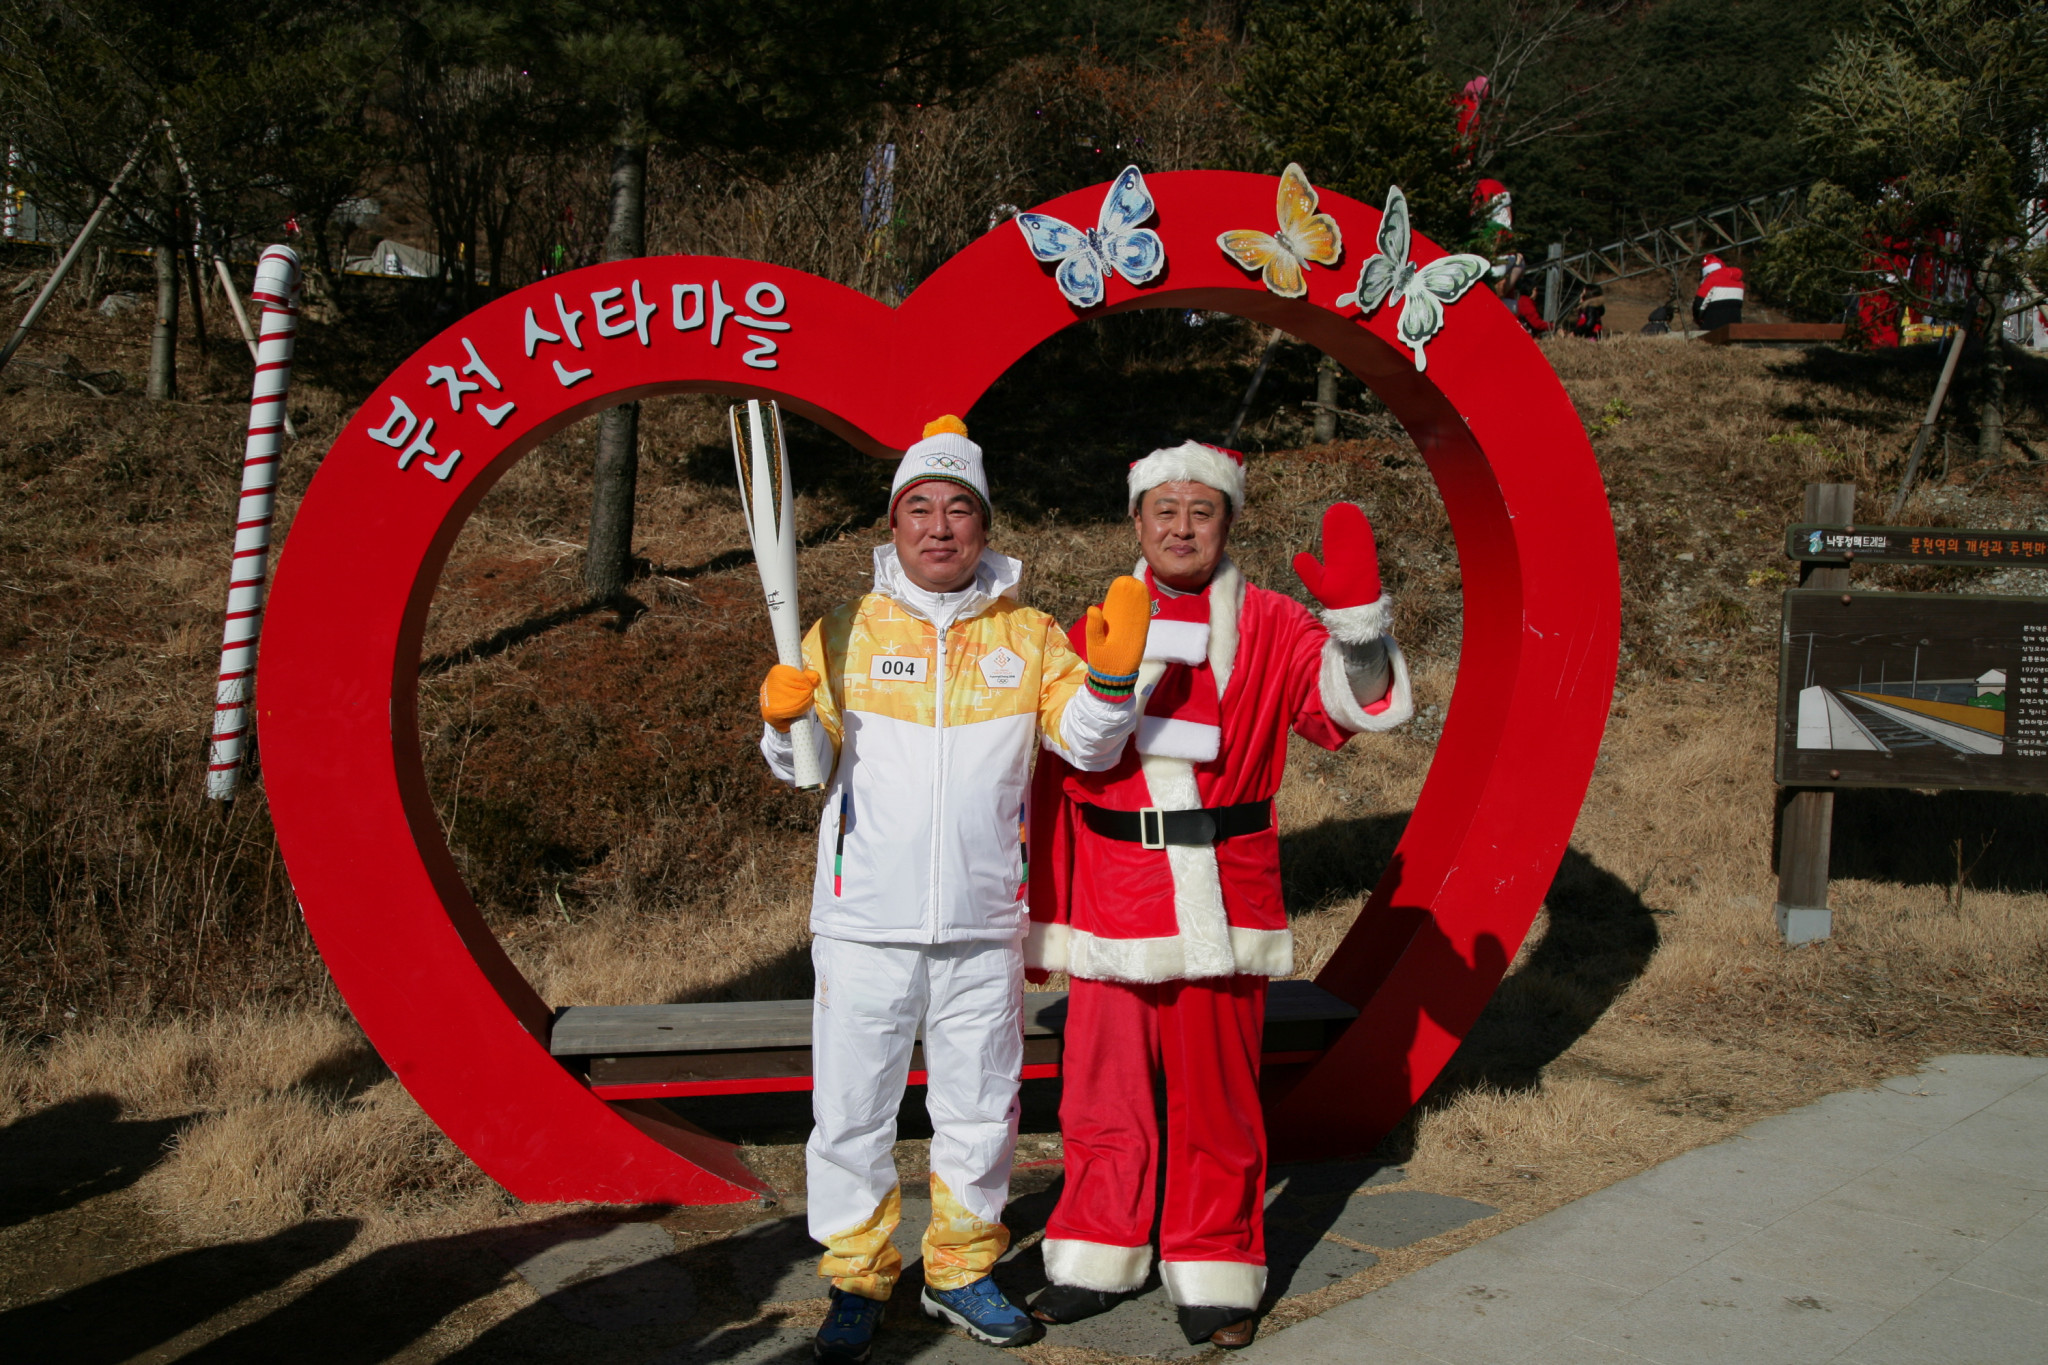 Pyeongchang 2018 Torch Relay takes on Christmas-feel as Olympic year approaches